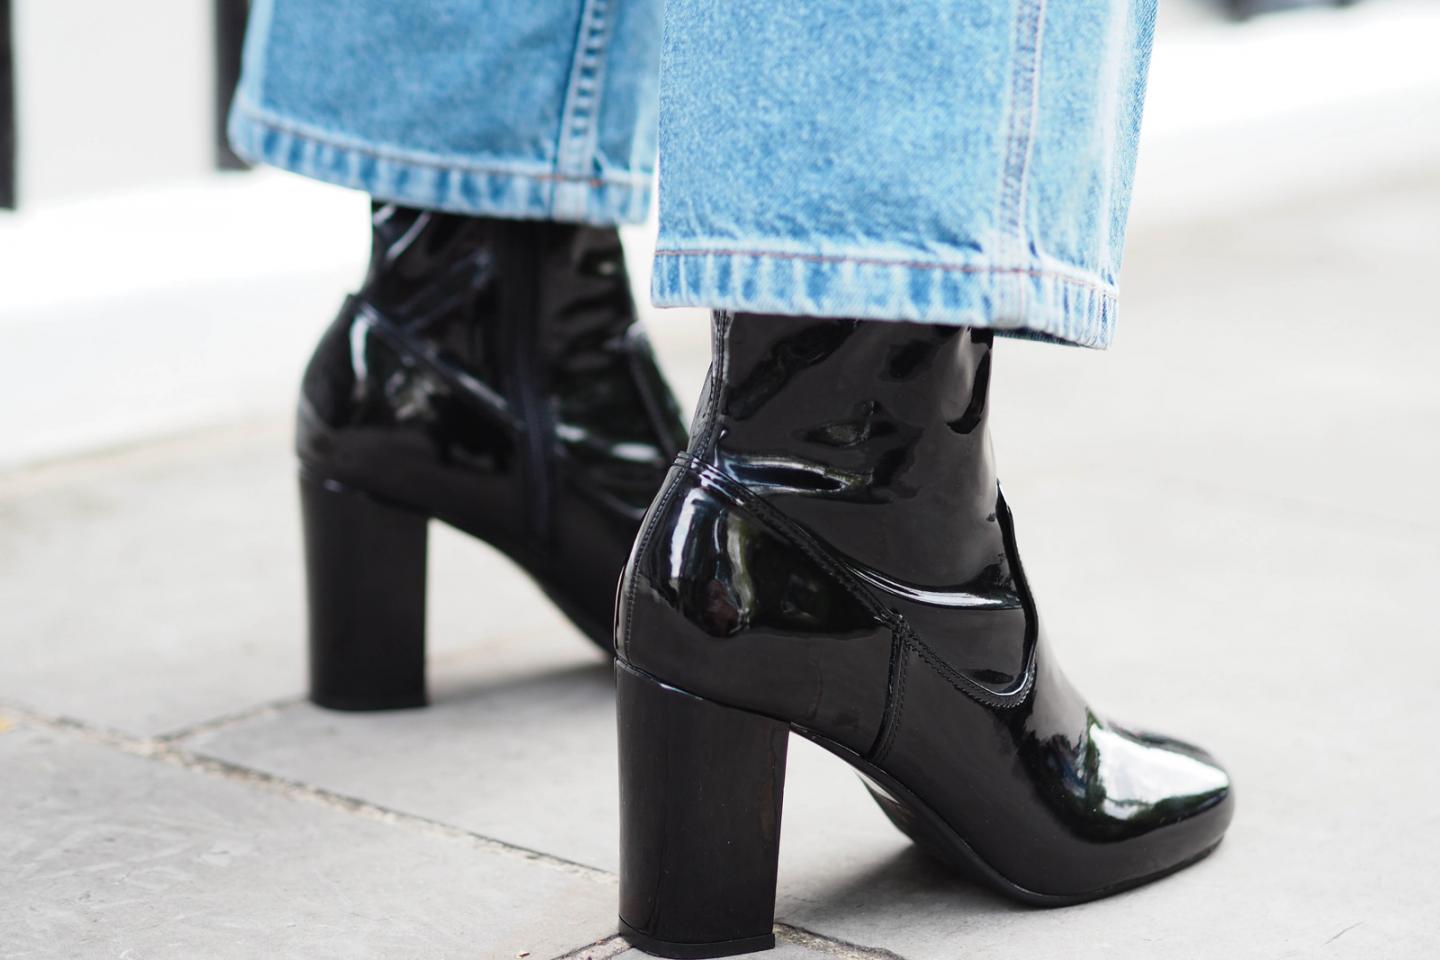 EJSTYLE wears wide leg cropped Topshop jeans, Black patent River Island gogo block heel ankle boots